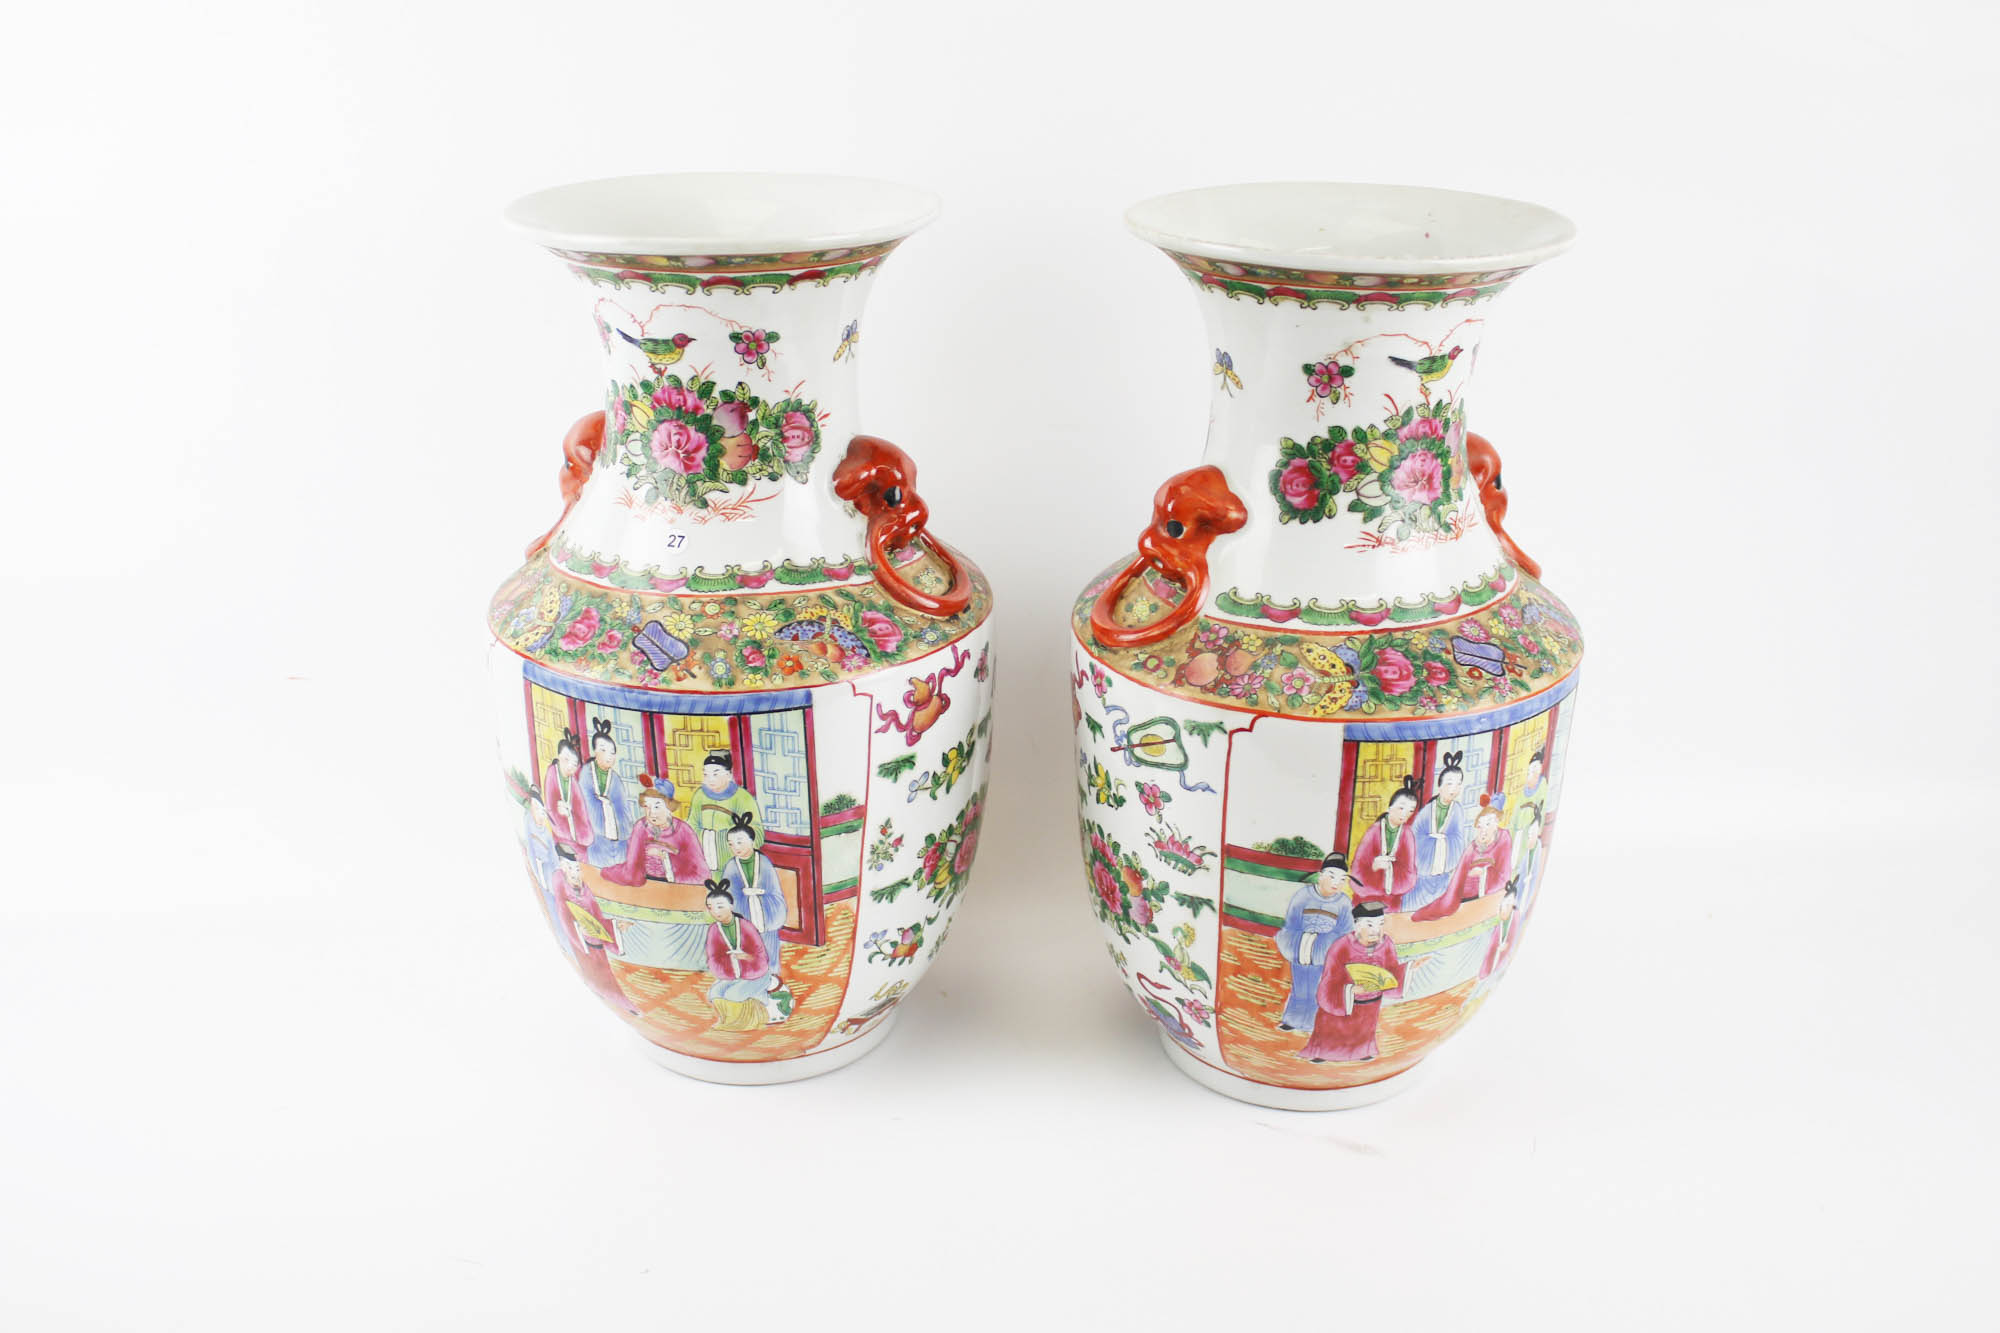 Pair of Chinese republic porcelain vases. With polychrome enamel decoration of figures and flowers.